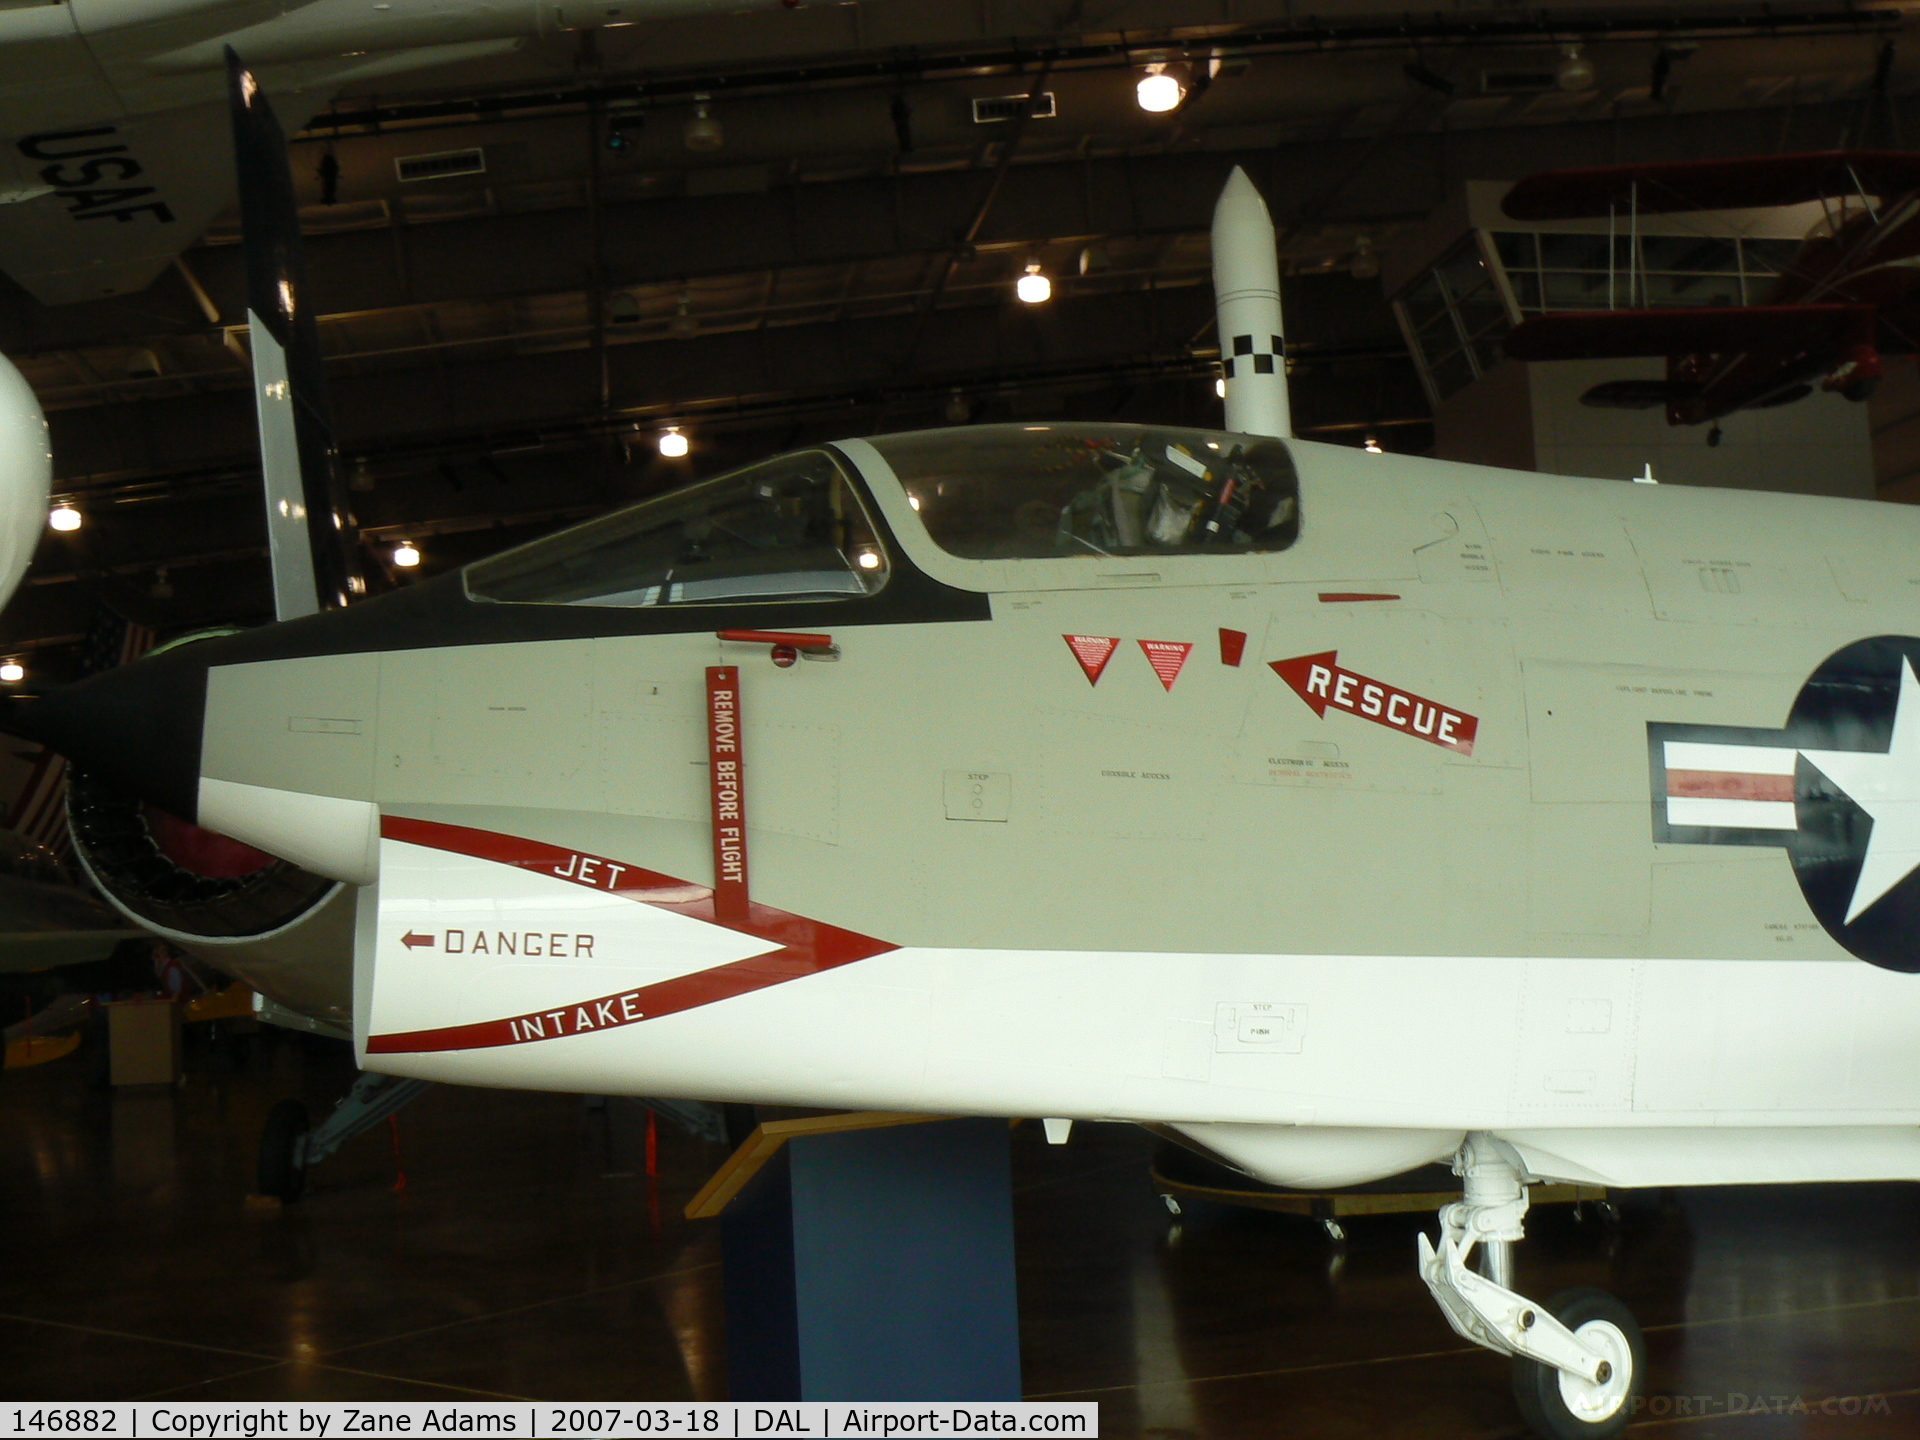 146882, Vought F8U-1P Crusader C/N Not found 146882, At Frontiers of Flight Museum - Dallas, TX